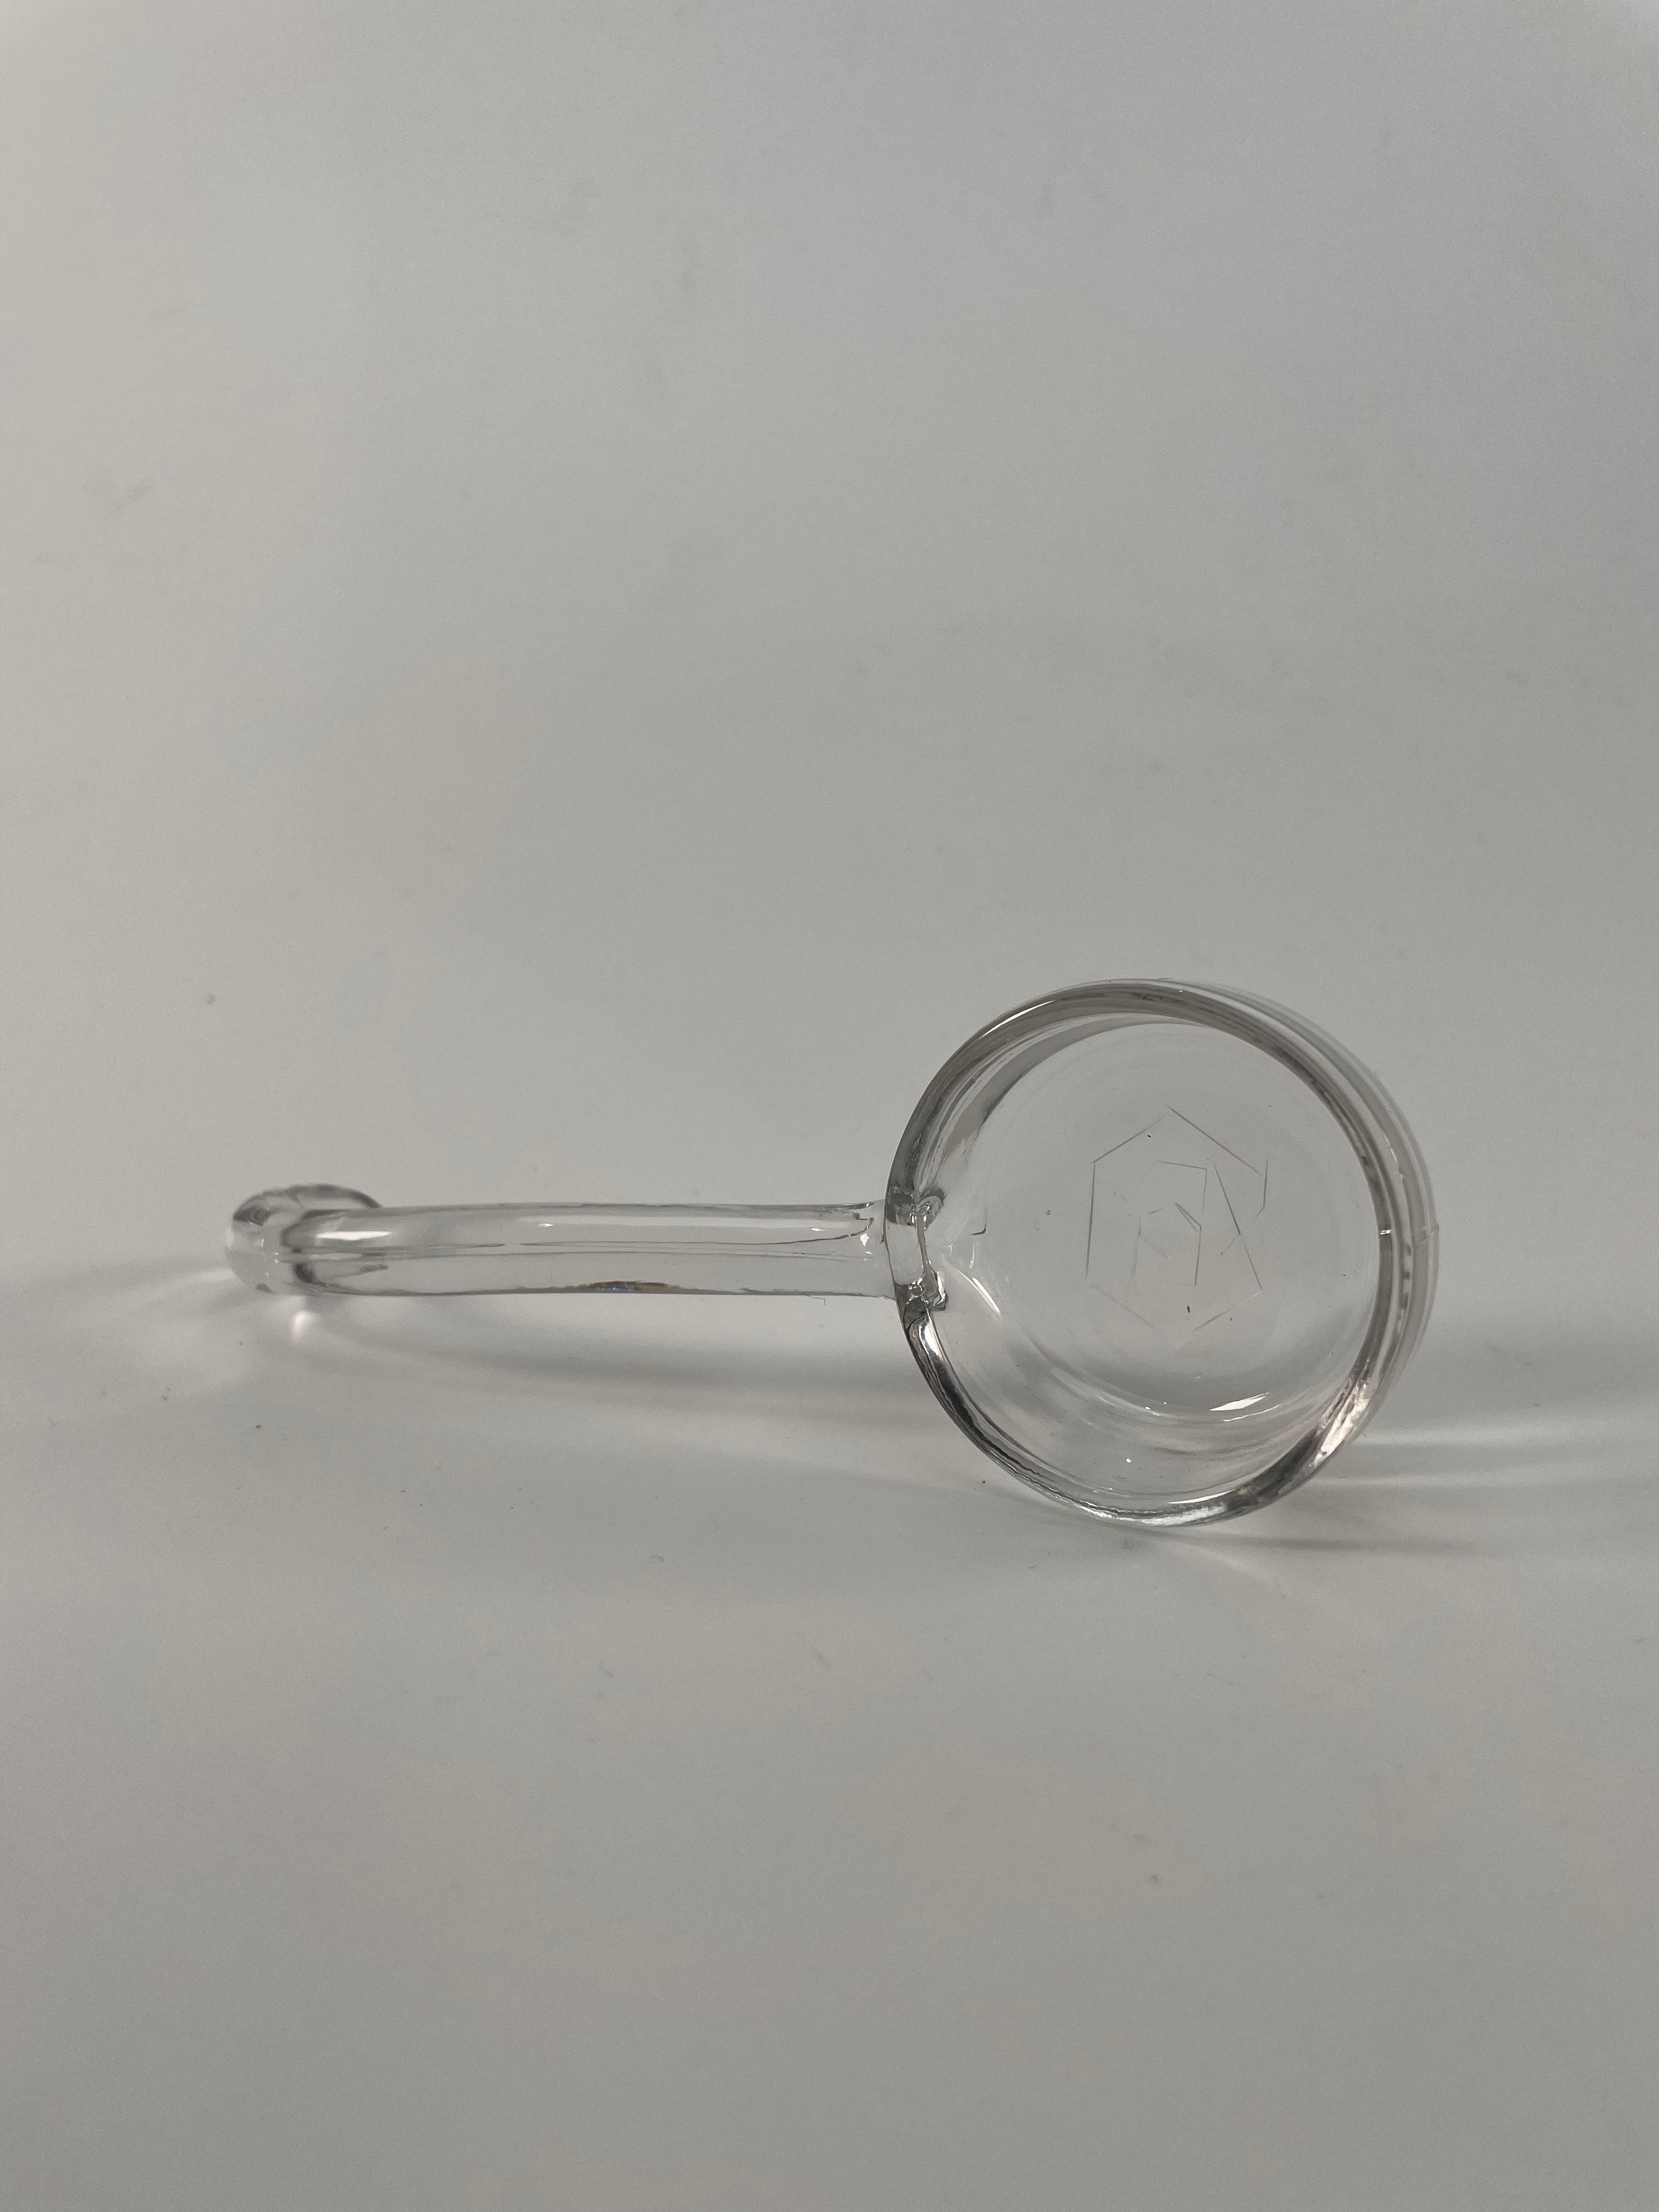 Two Glass Ladles (1930s)